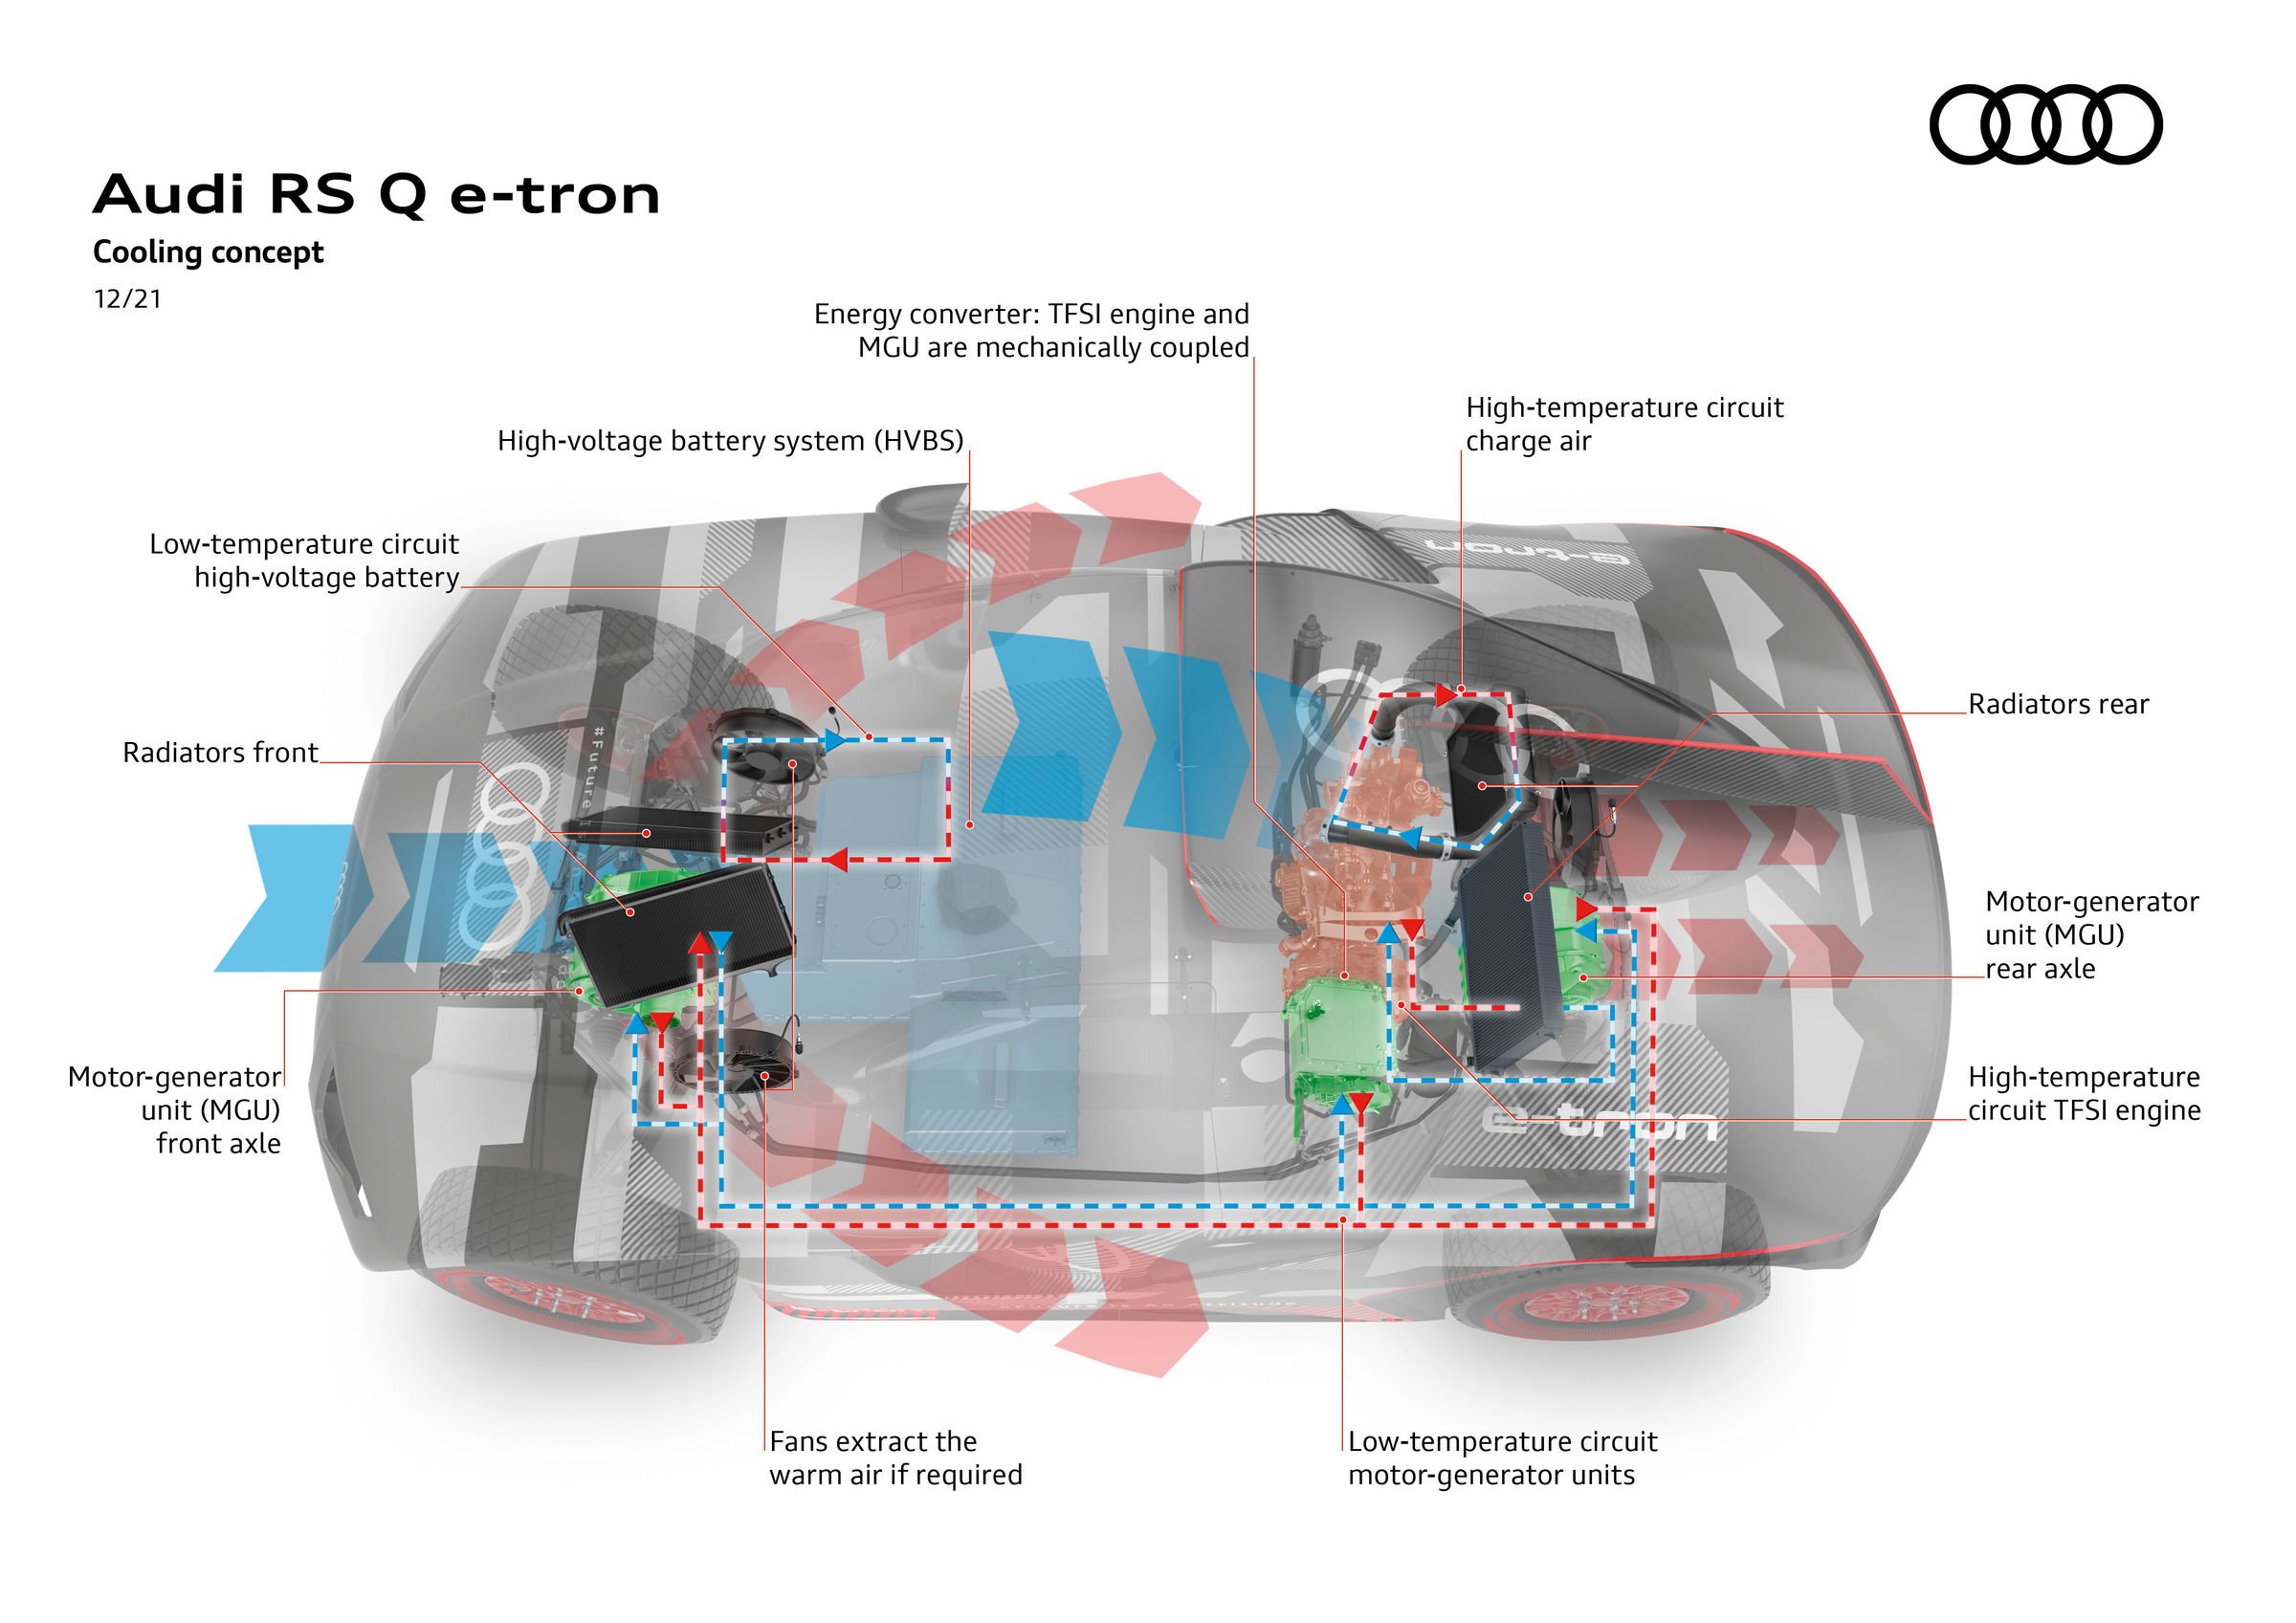 Audi RS Q e-tron installed with a complex cooling concept